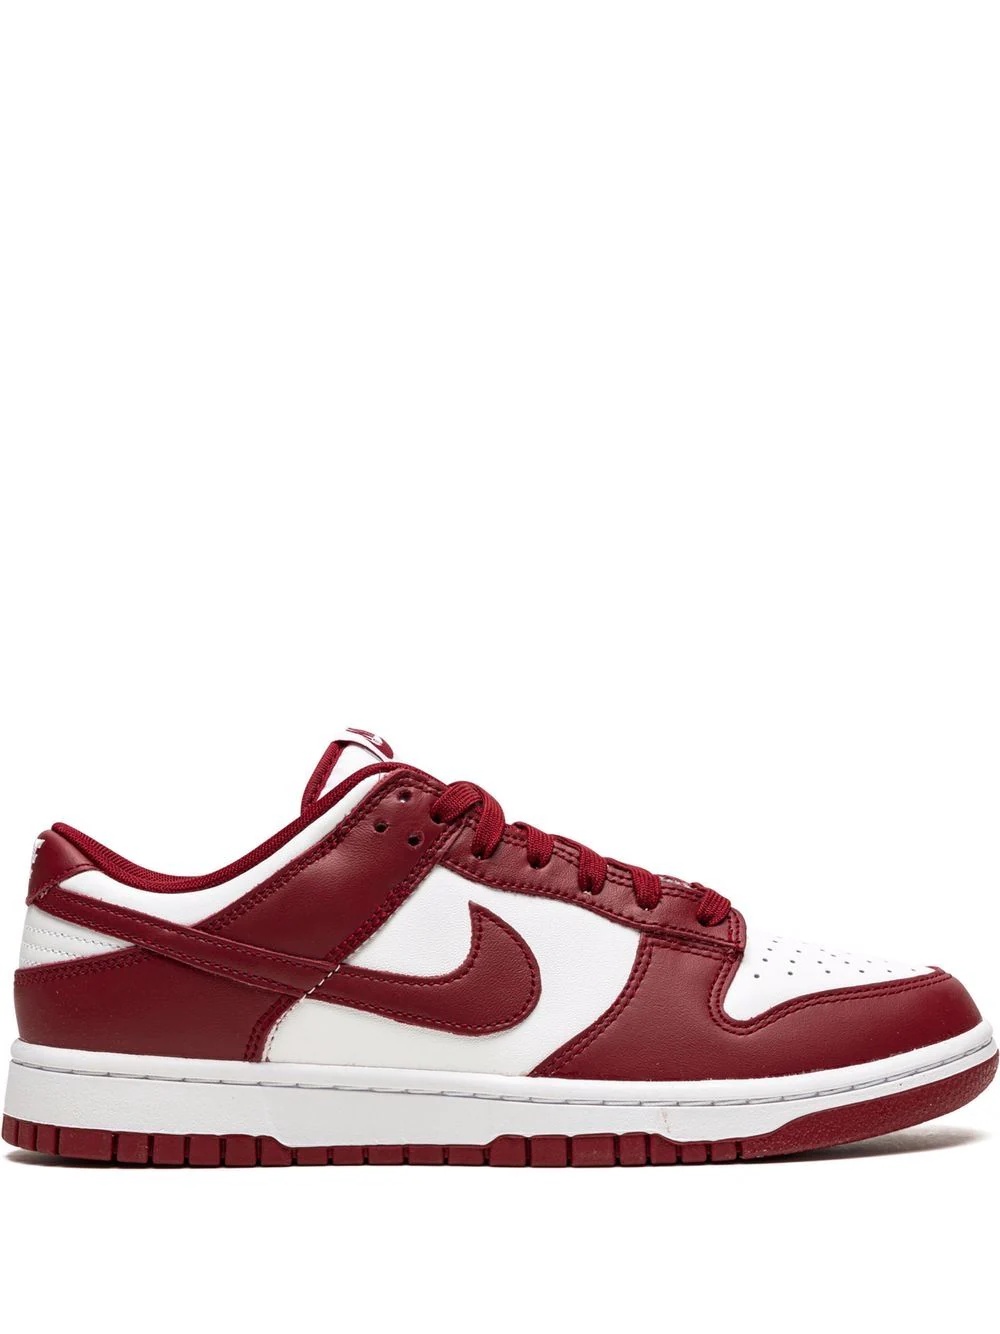 Dunk Low "Team Red" sneakers - 1